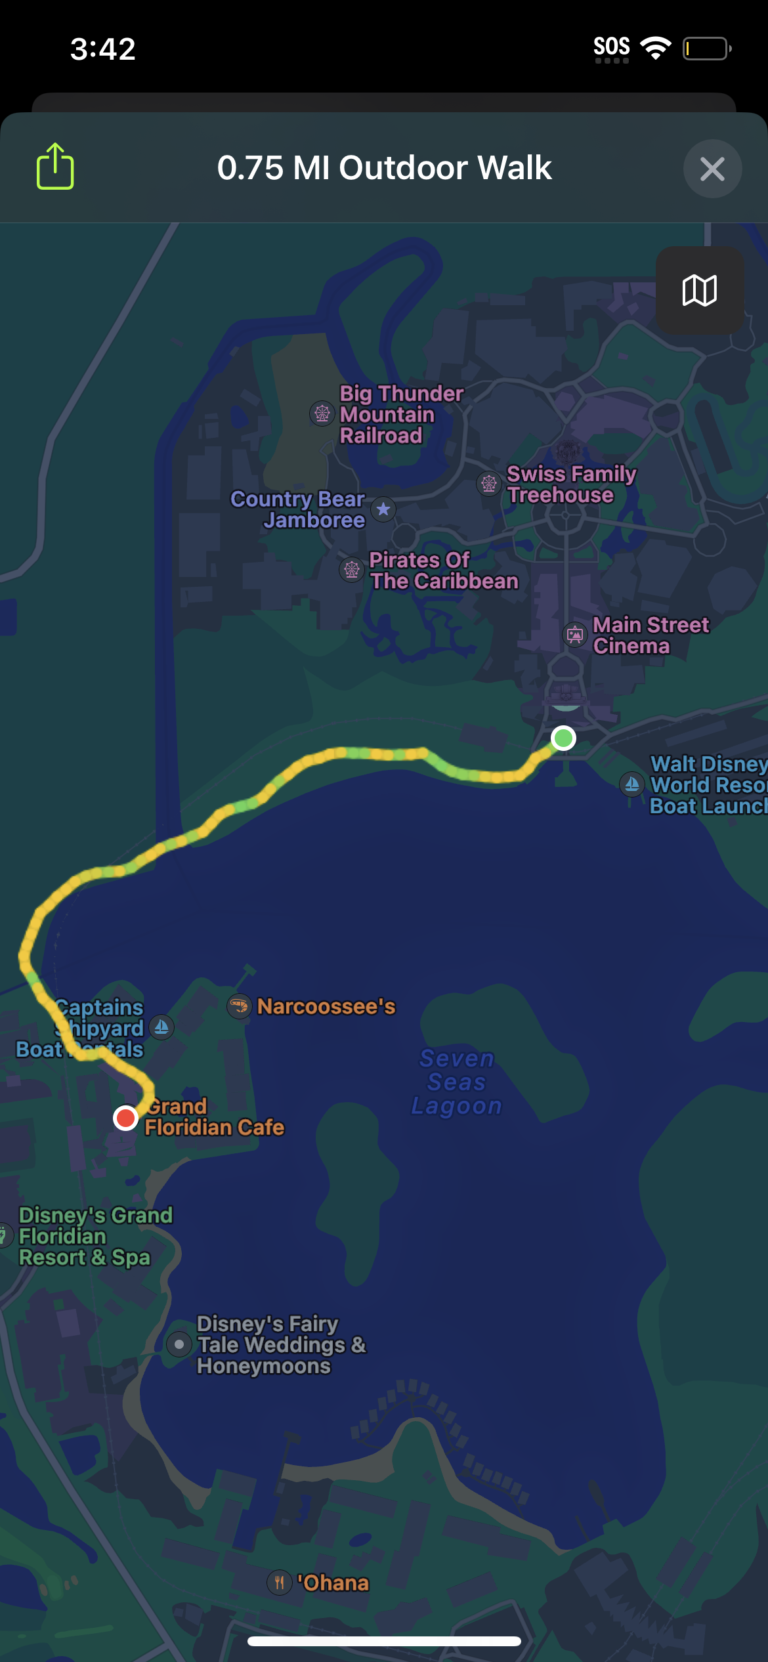 The walking trail from Magic Kingdom to Grand Floridian.